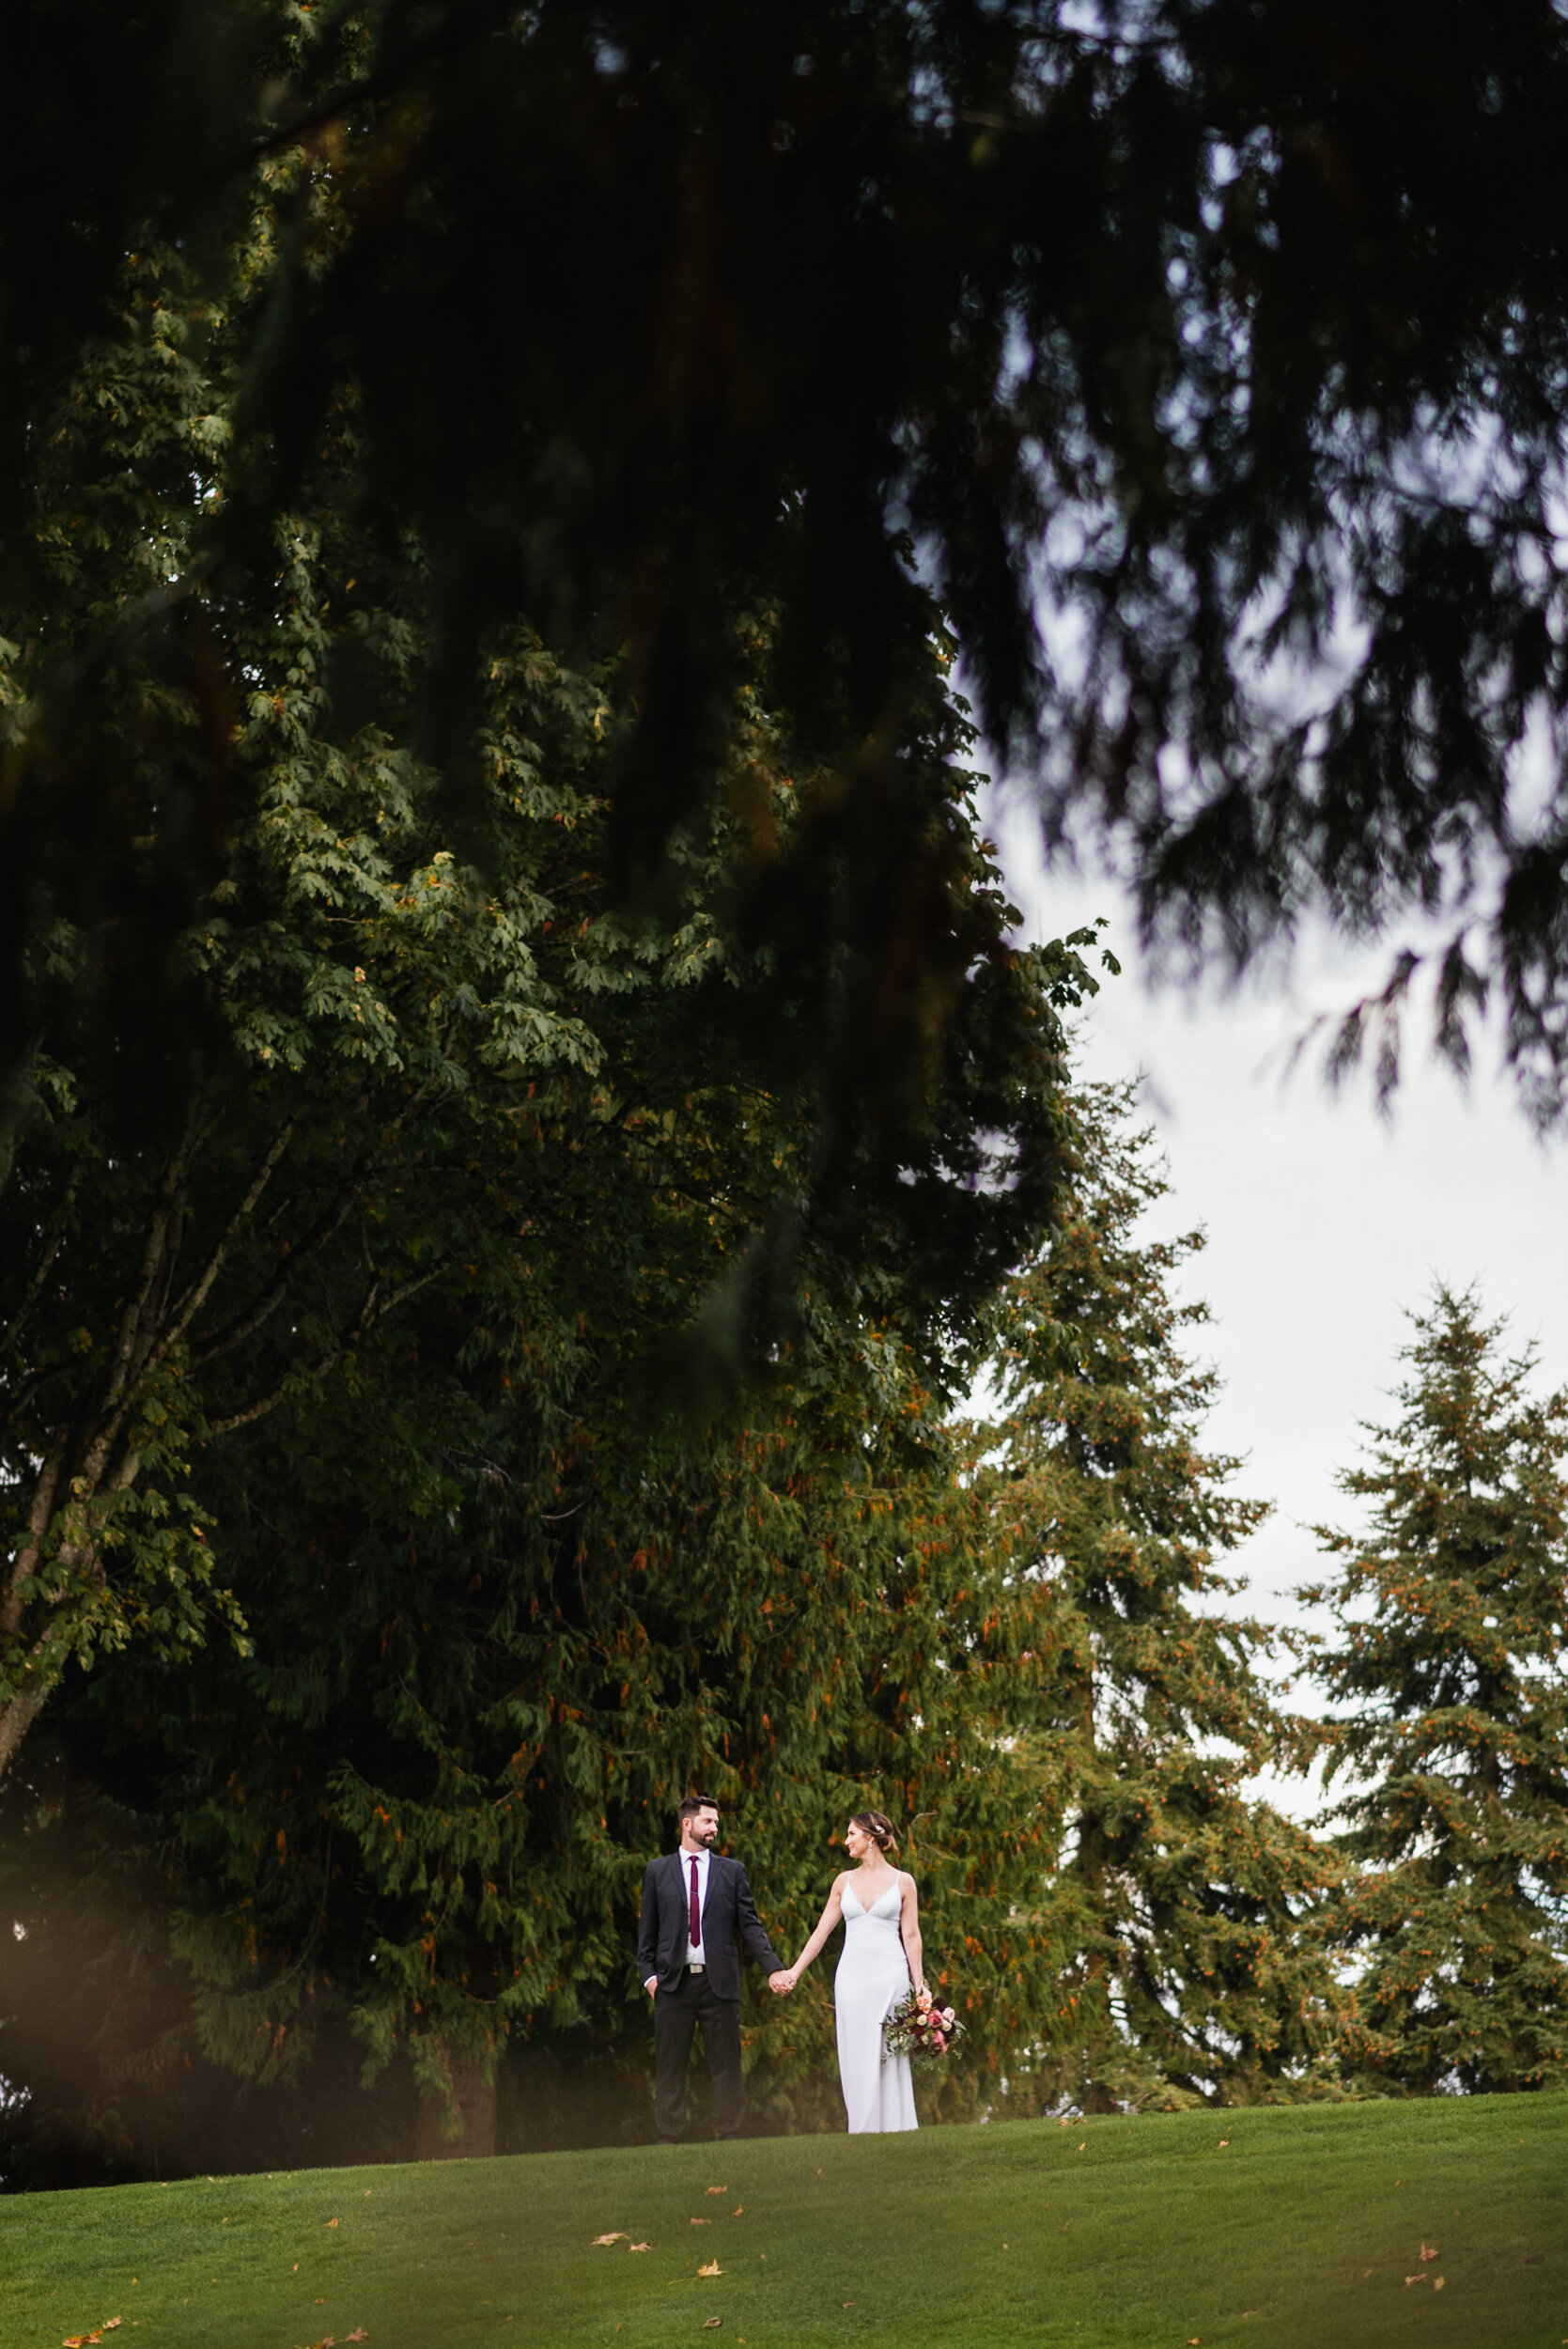 Bride and Groom standing on golf course